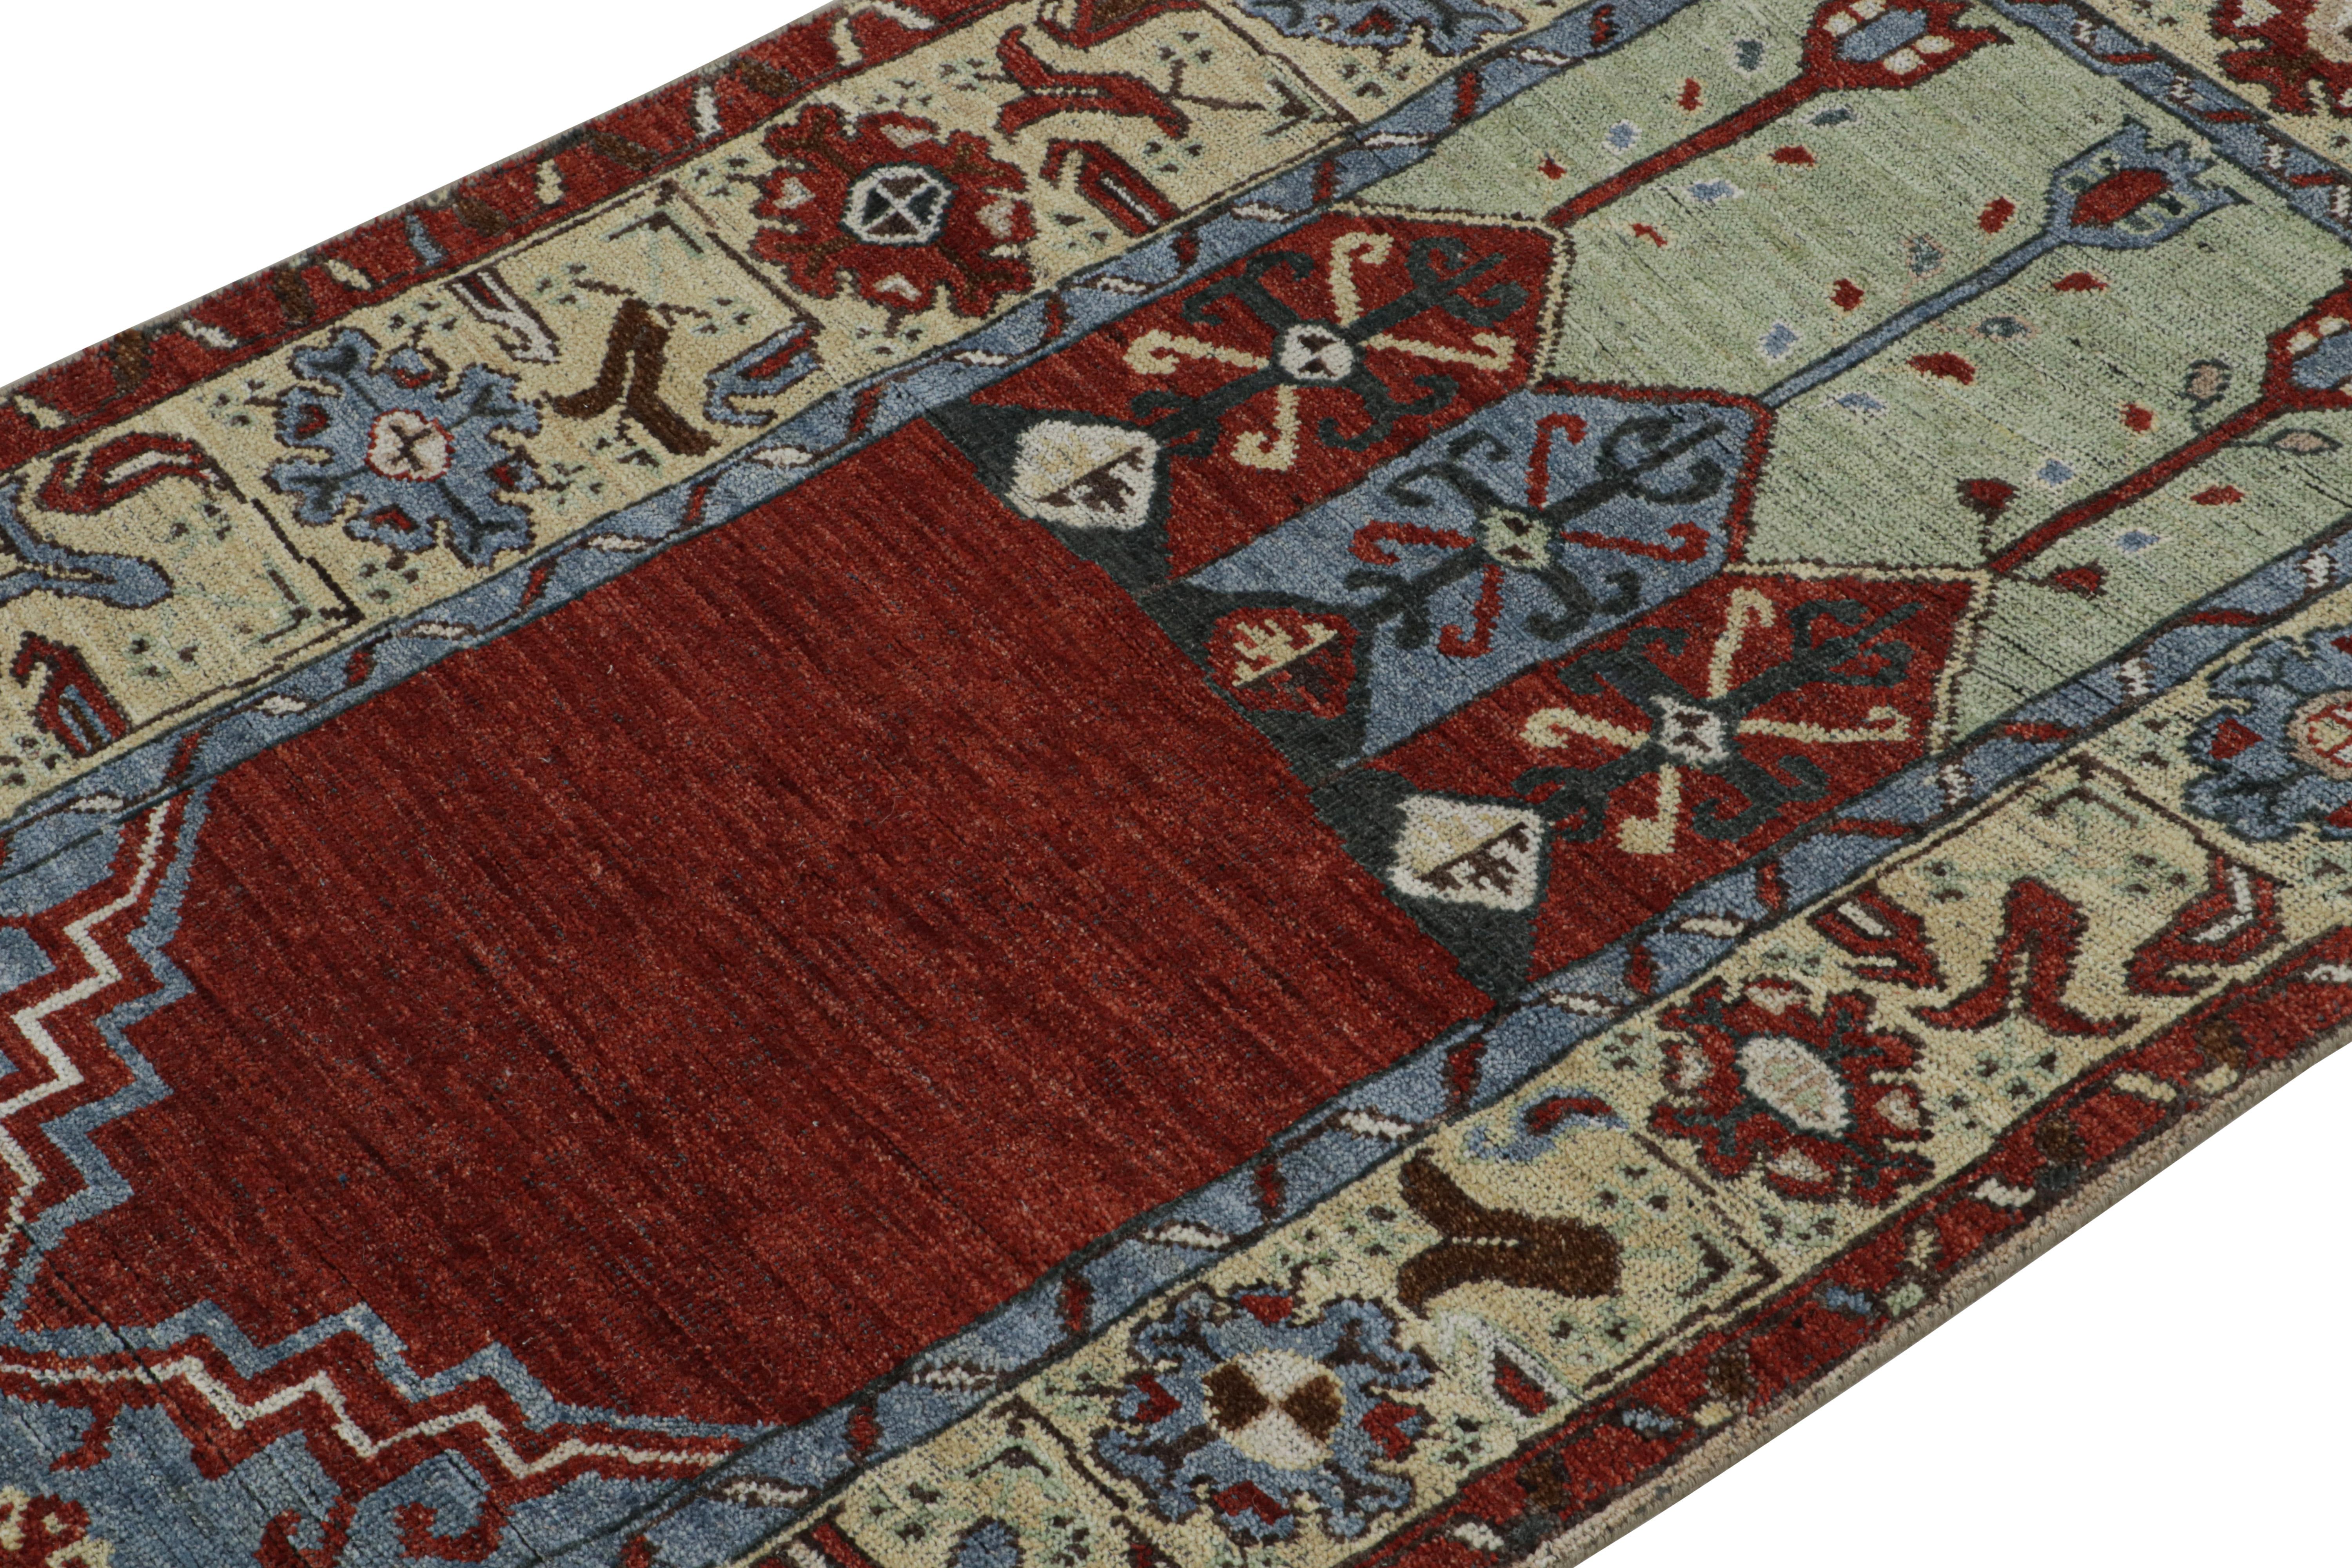 Hand-Knotted Rug & Kilim’s Tribal Style Runner Rug in Red with Mihrab and Floral Patterns For Sale